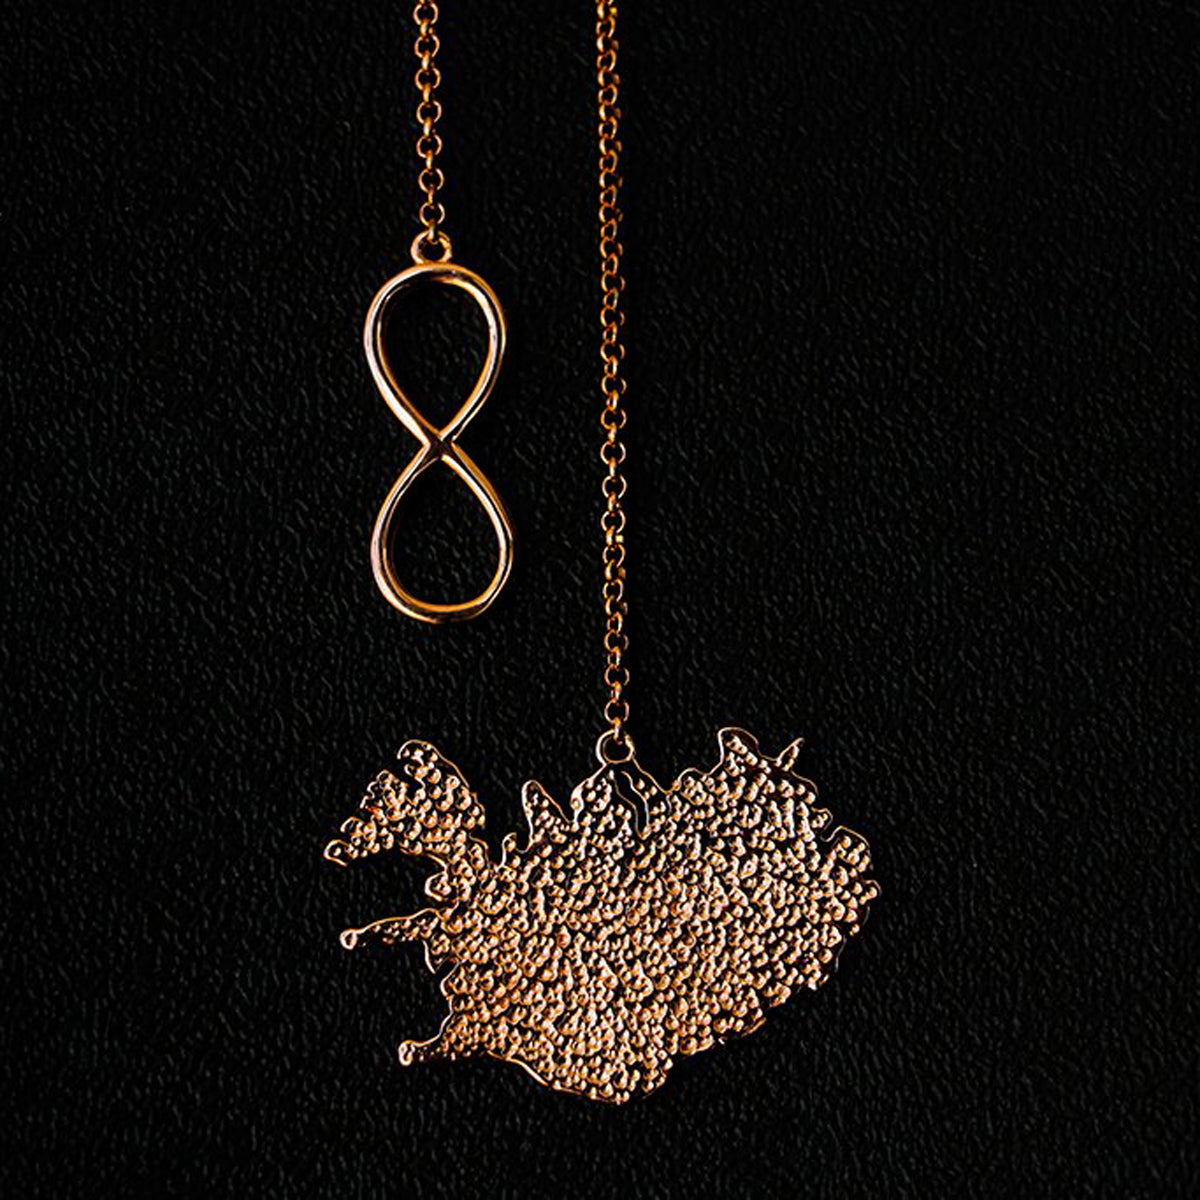 Iceland - Gold Plating Necklace